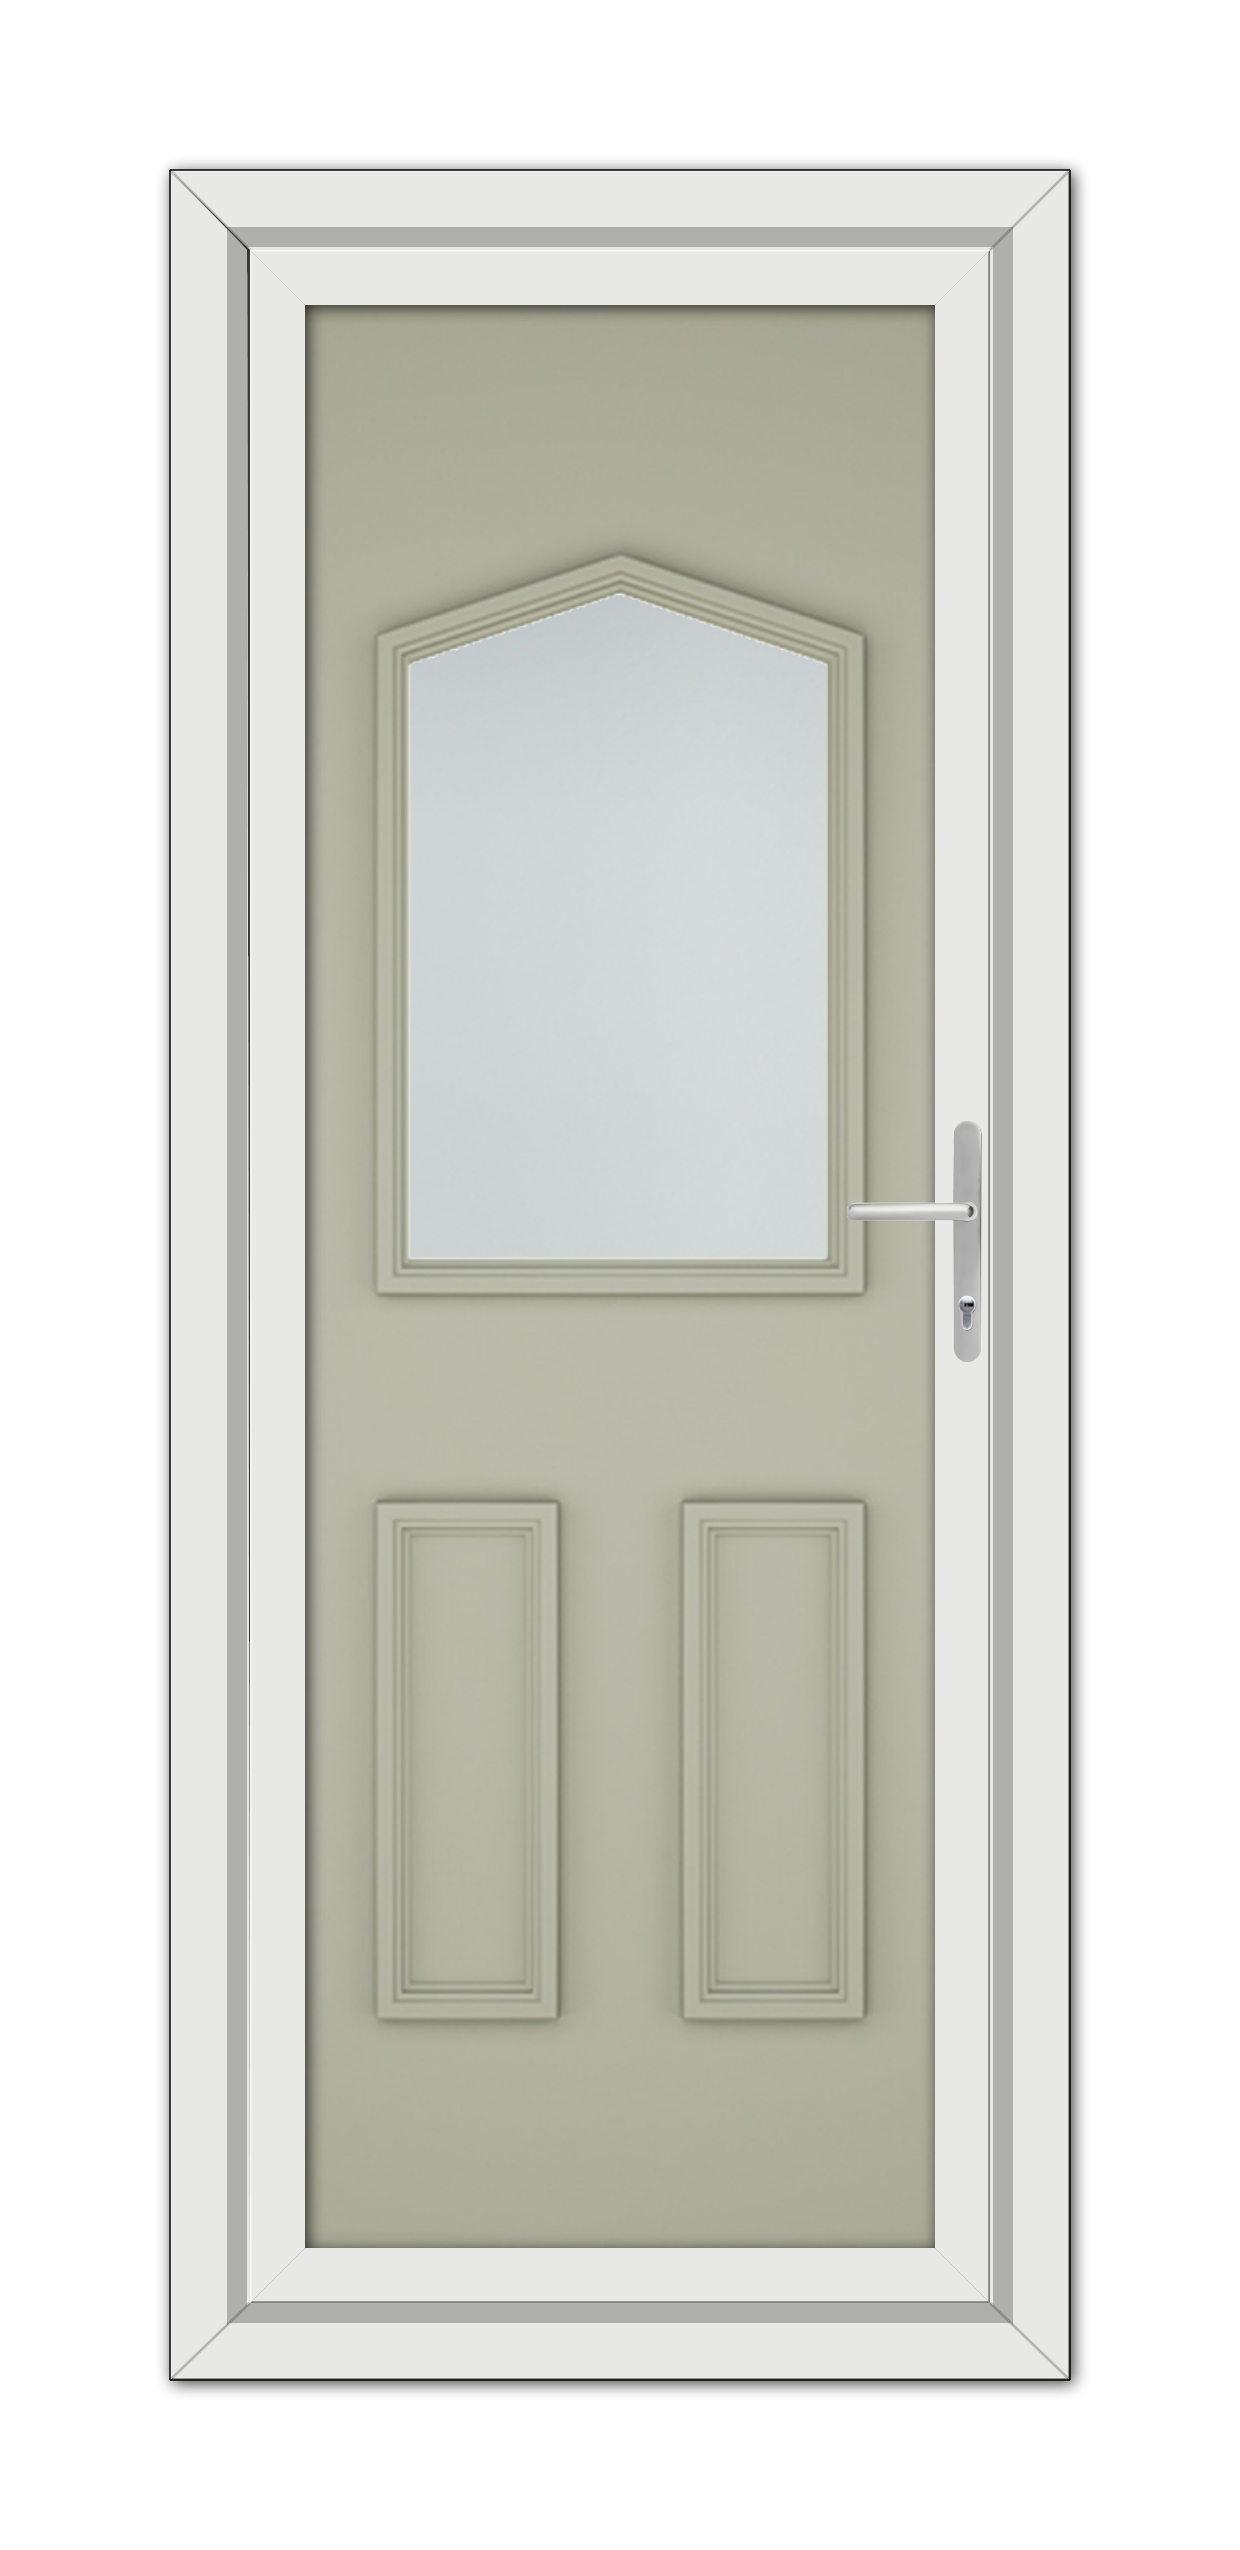 An Agate Grey Oxford uPVC door with a white frame, featuring an arched window at the top and two recessed panels below, equipped with a metallic handle on the right side.